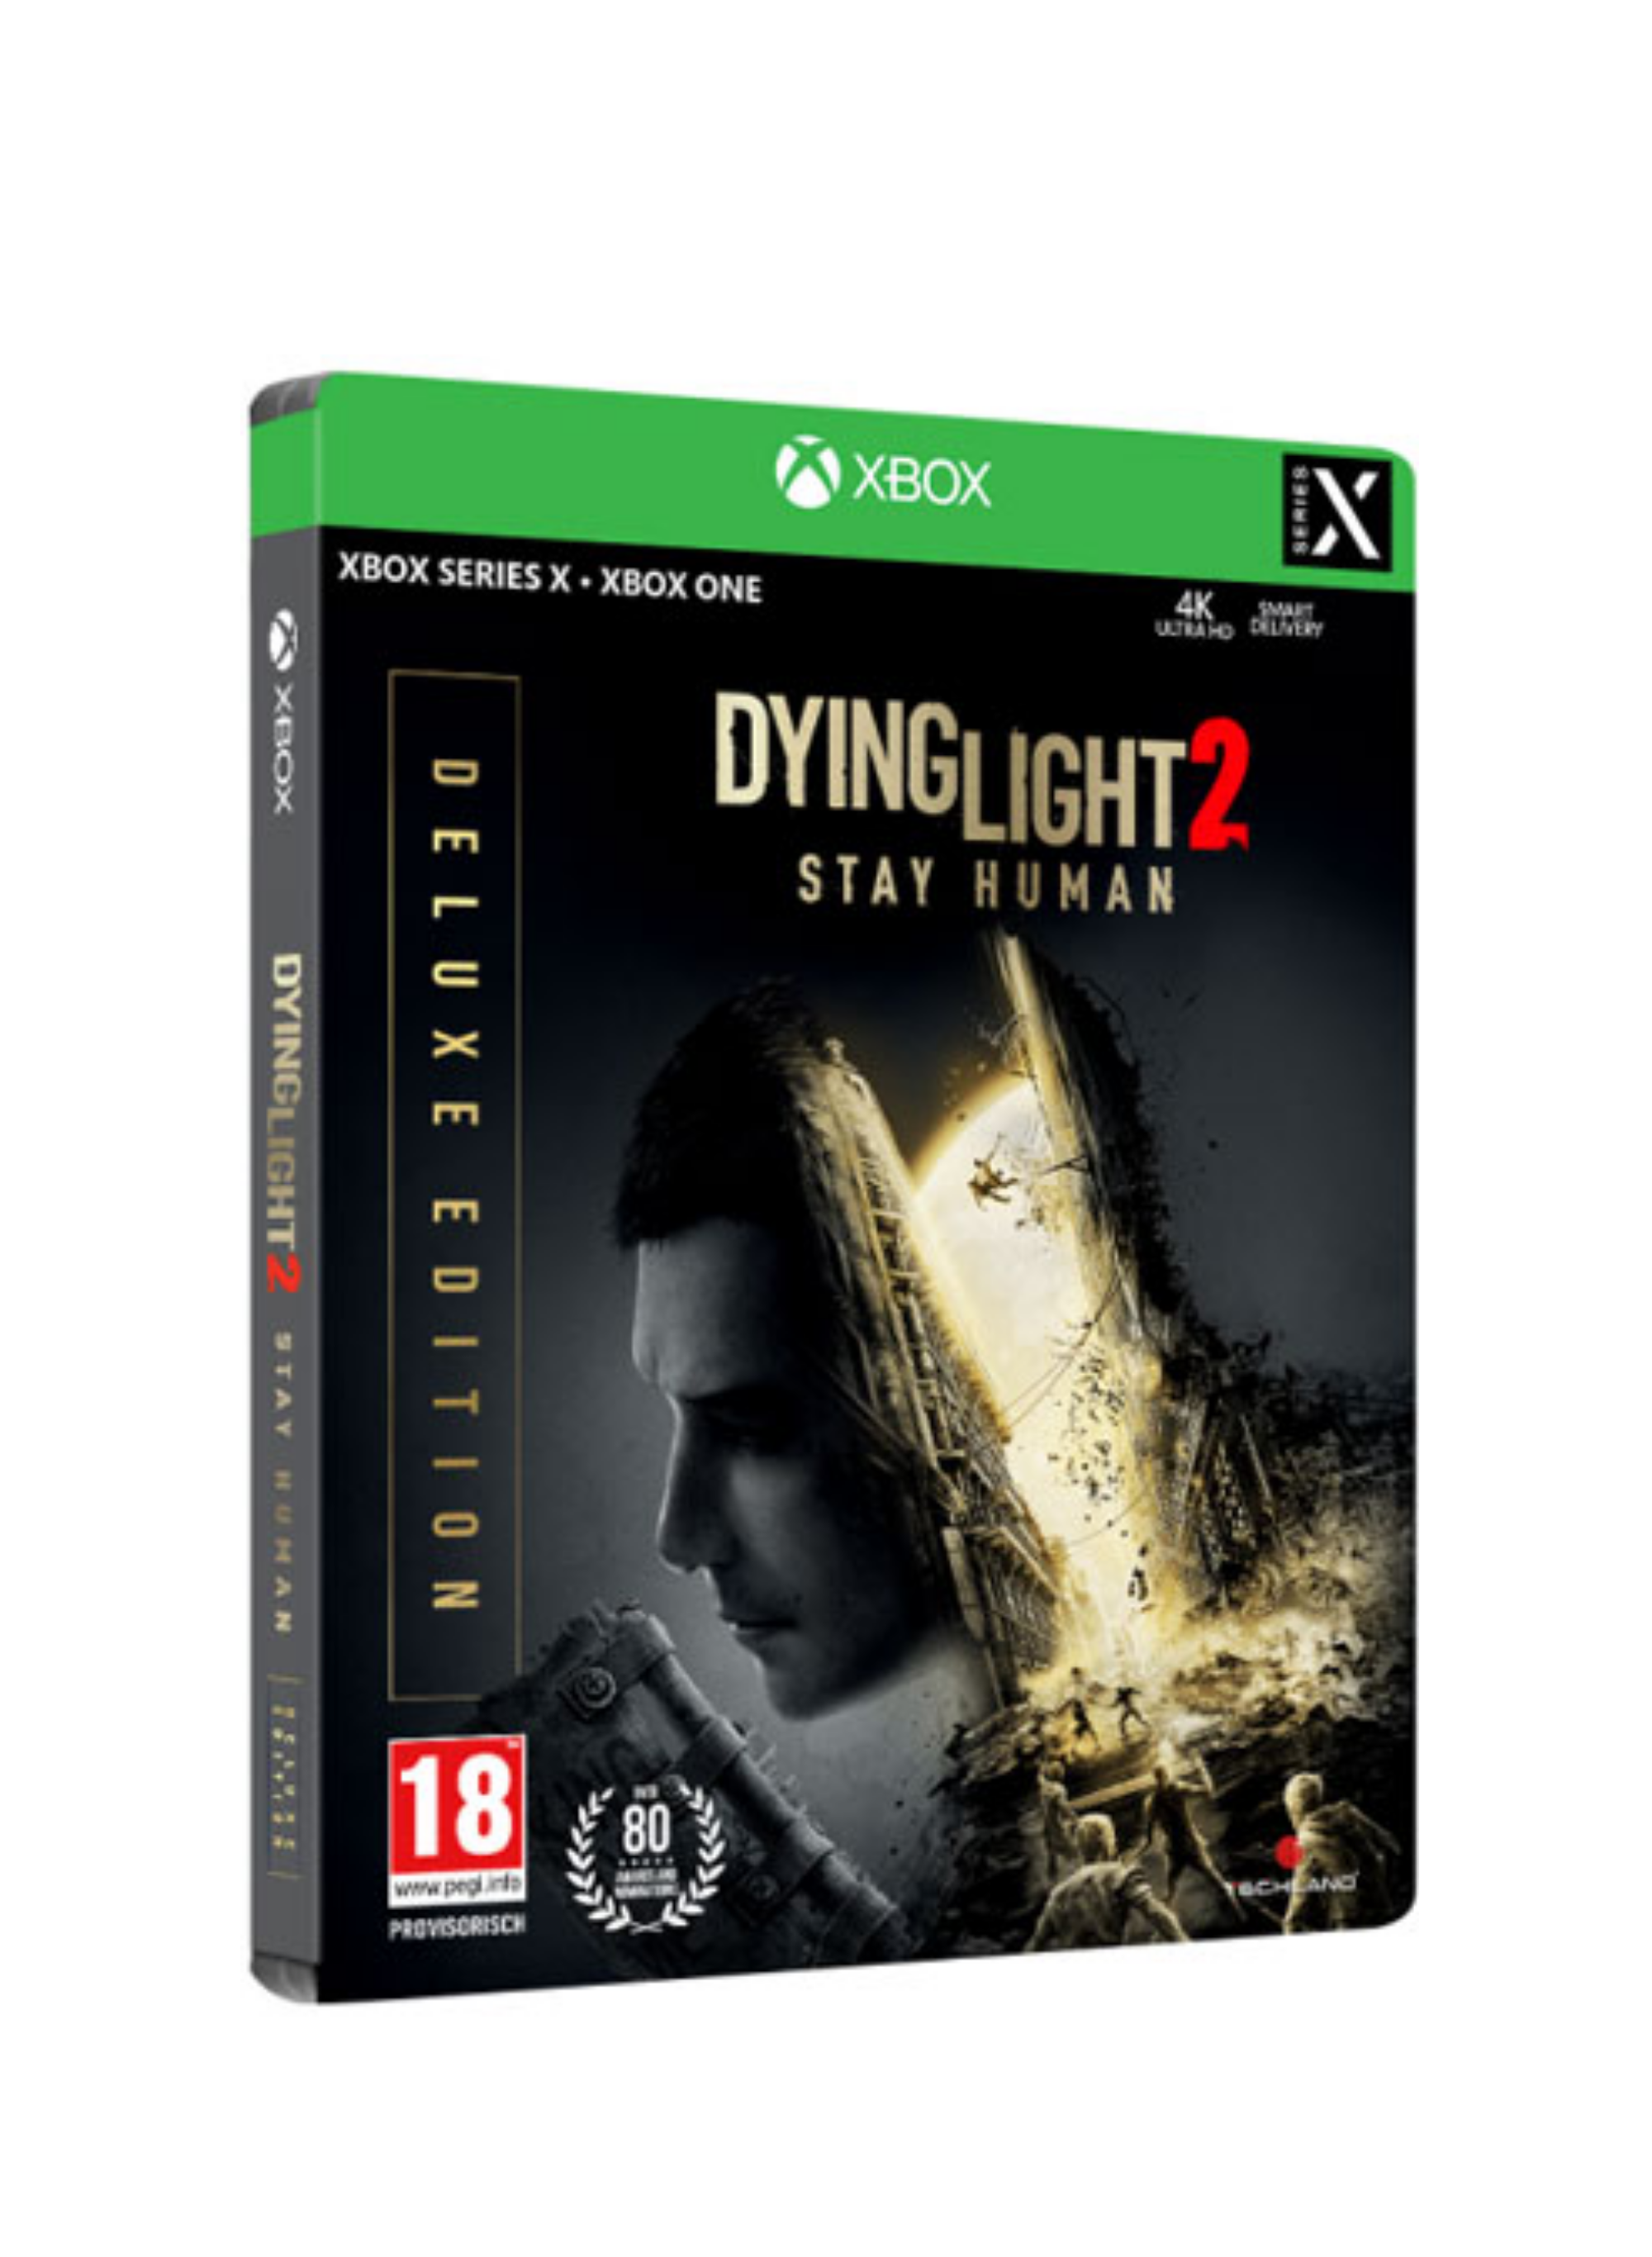 Dying Light 2 XBSX Deluxe AT uncut Stay Human- Xbox one / Xbox Series X